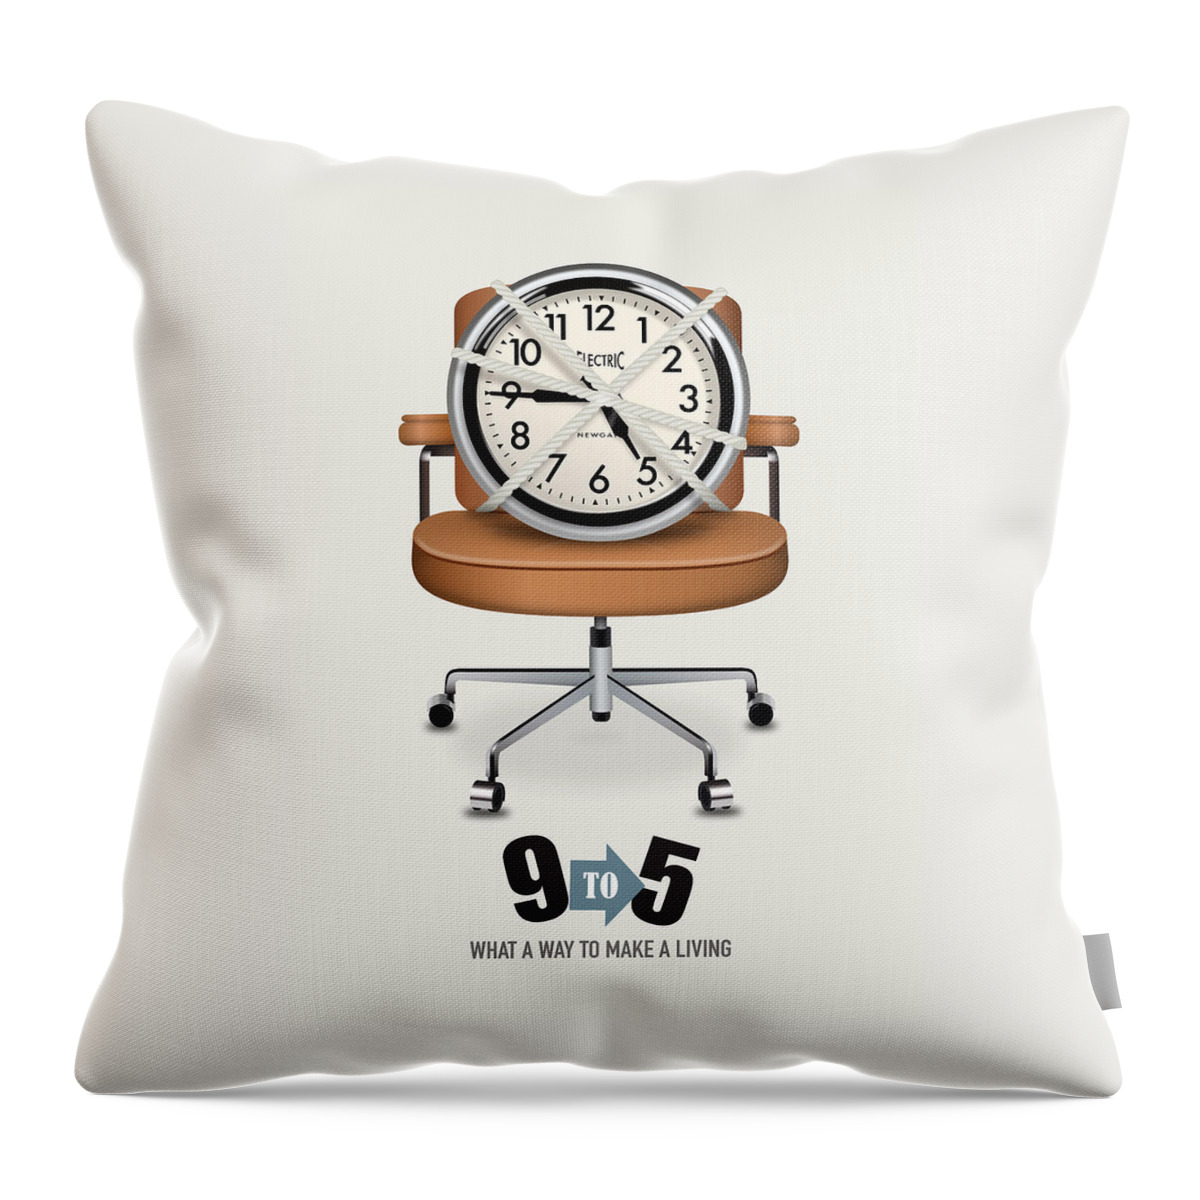 9 To 5 Throw Pillow featuring the digital art 9 to 5 - Alternative Movie Poster by Movie Poster Boy